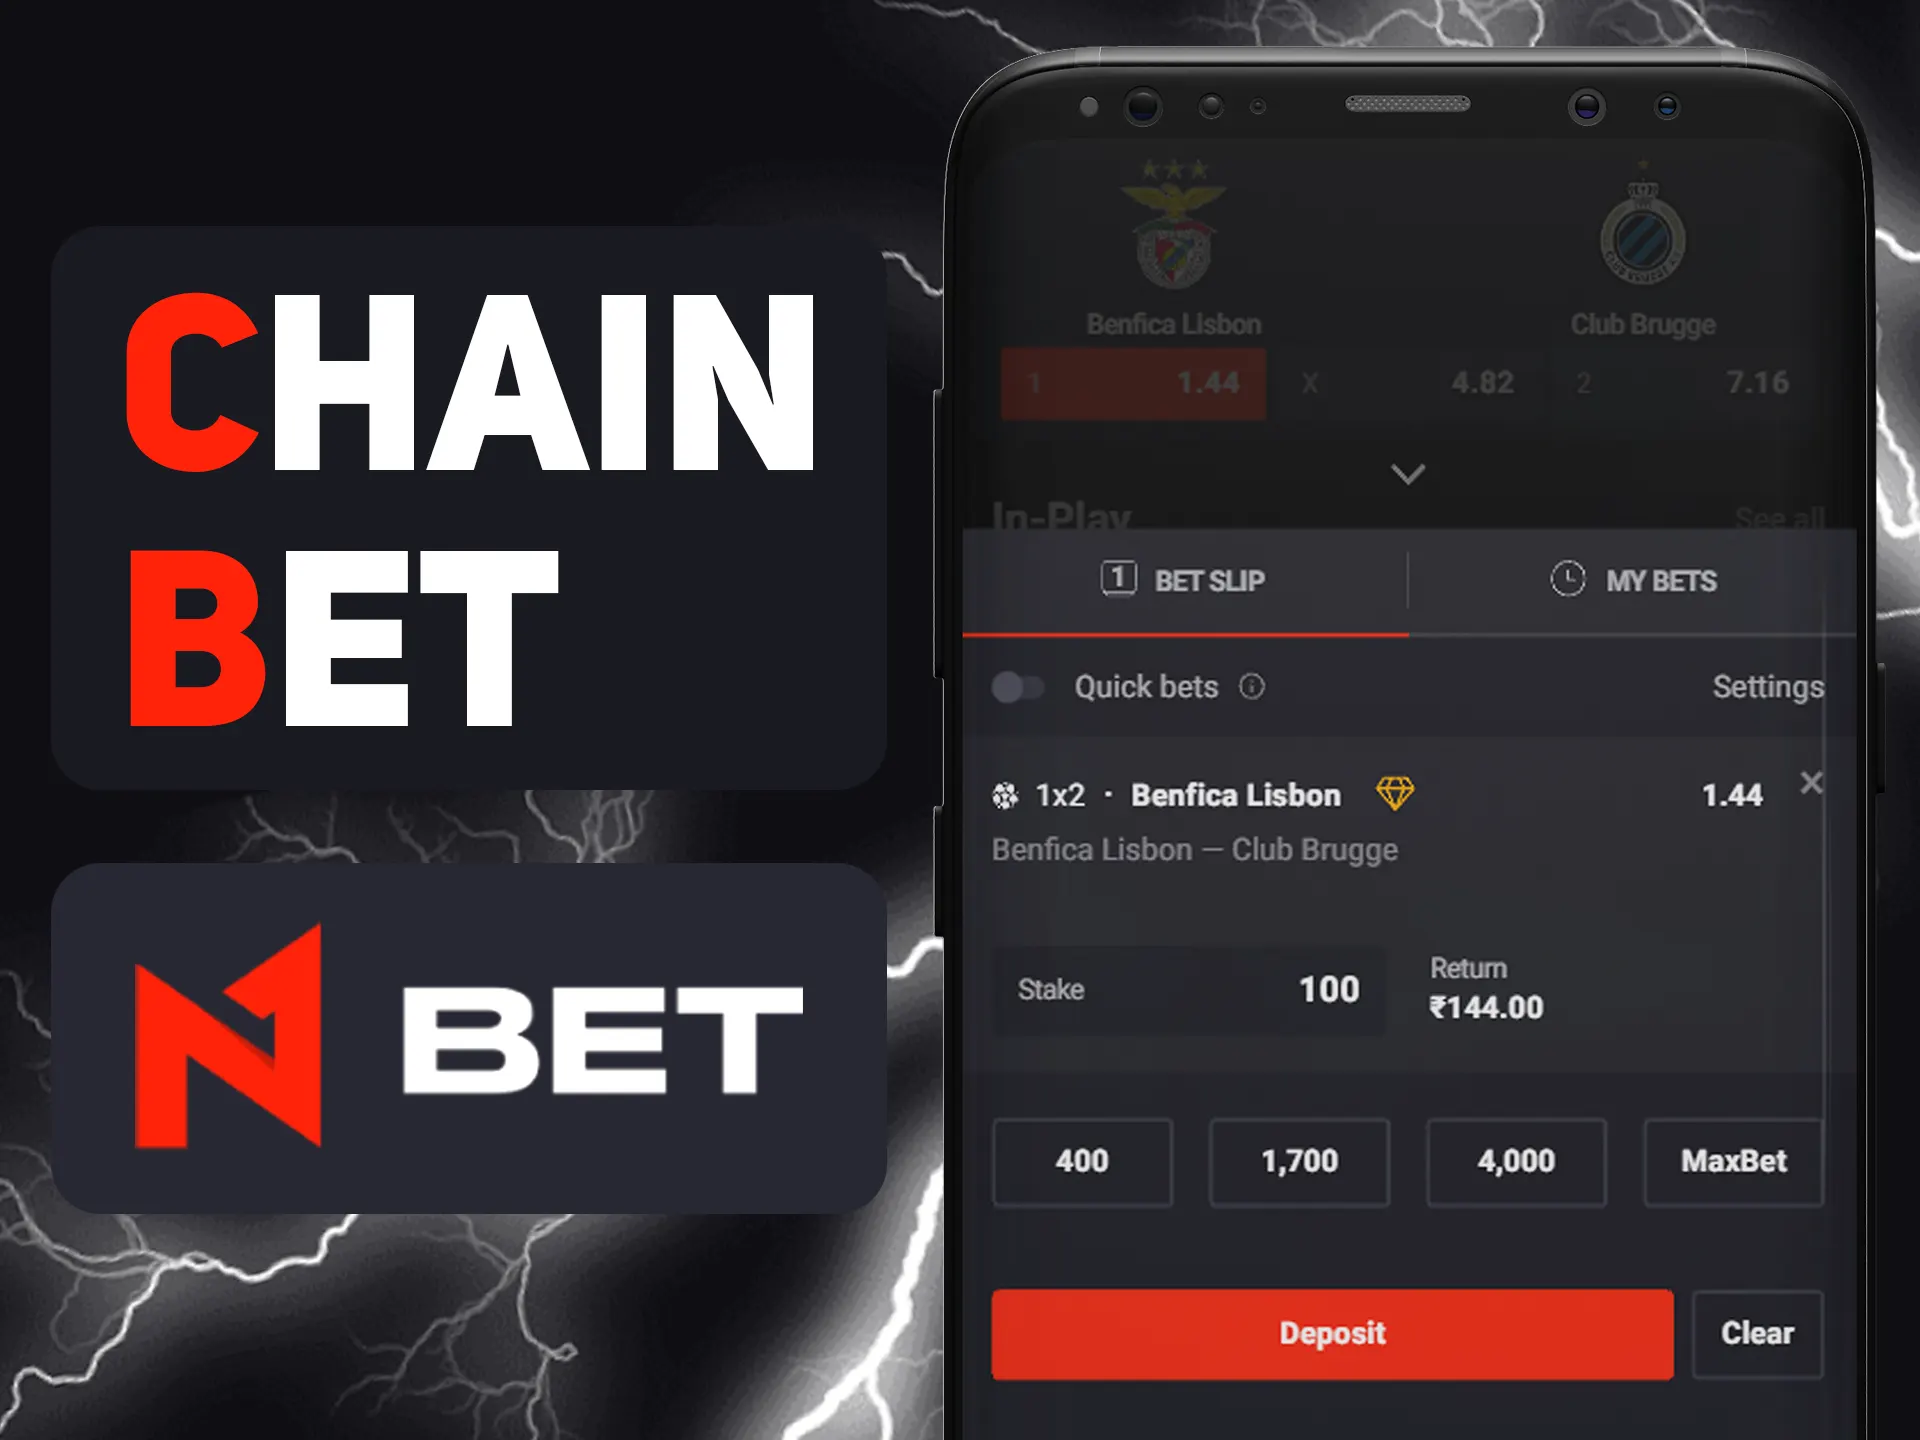 Make multiple great bets at N1bet.